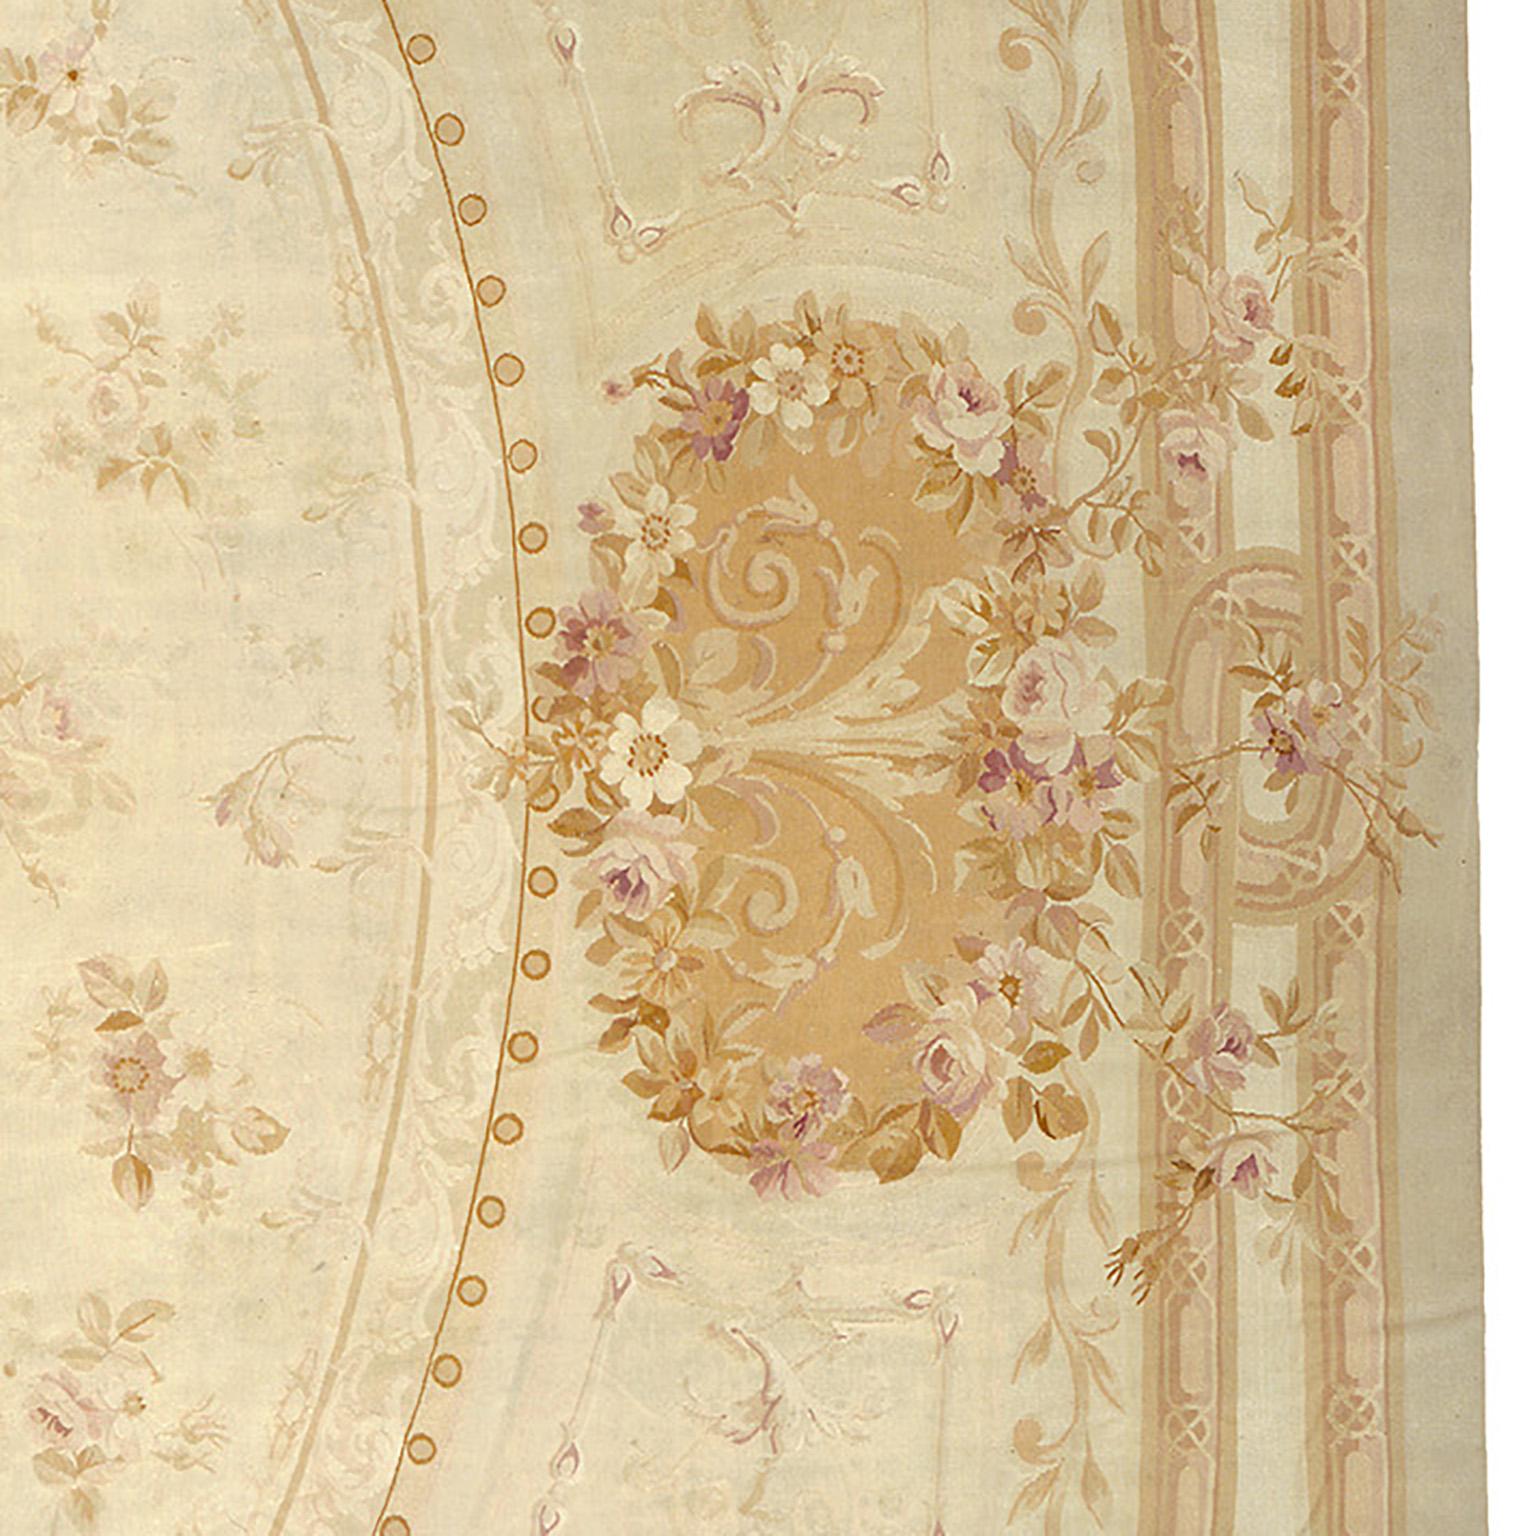 Mid-19th Century, French, Aubusson Rug In Good Condition For Sale In New York, NY